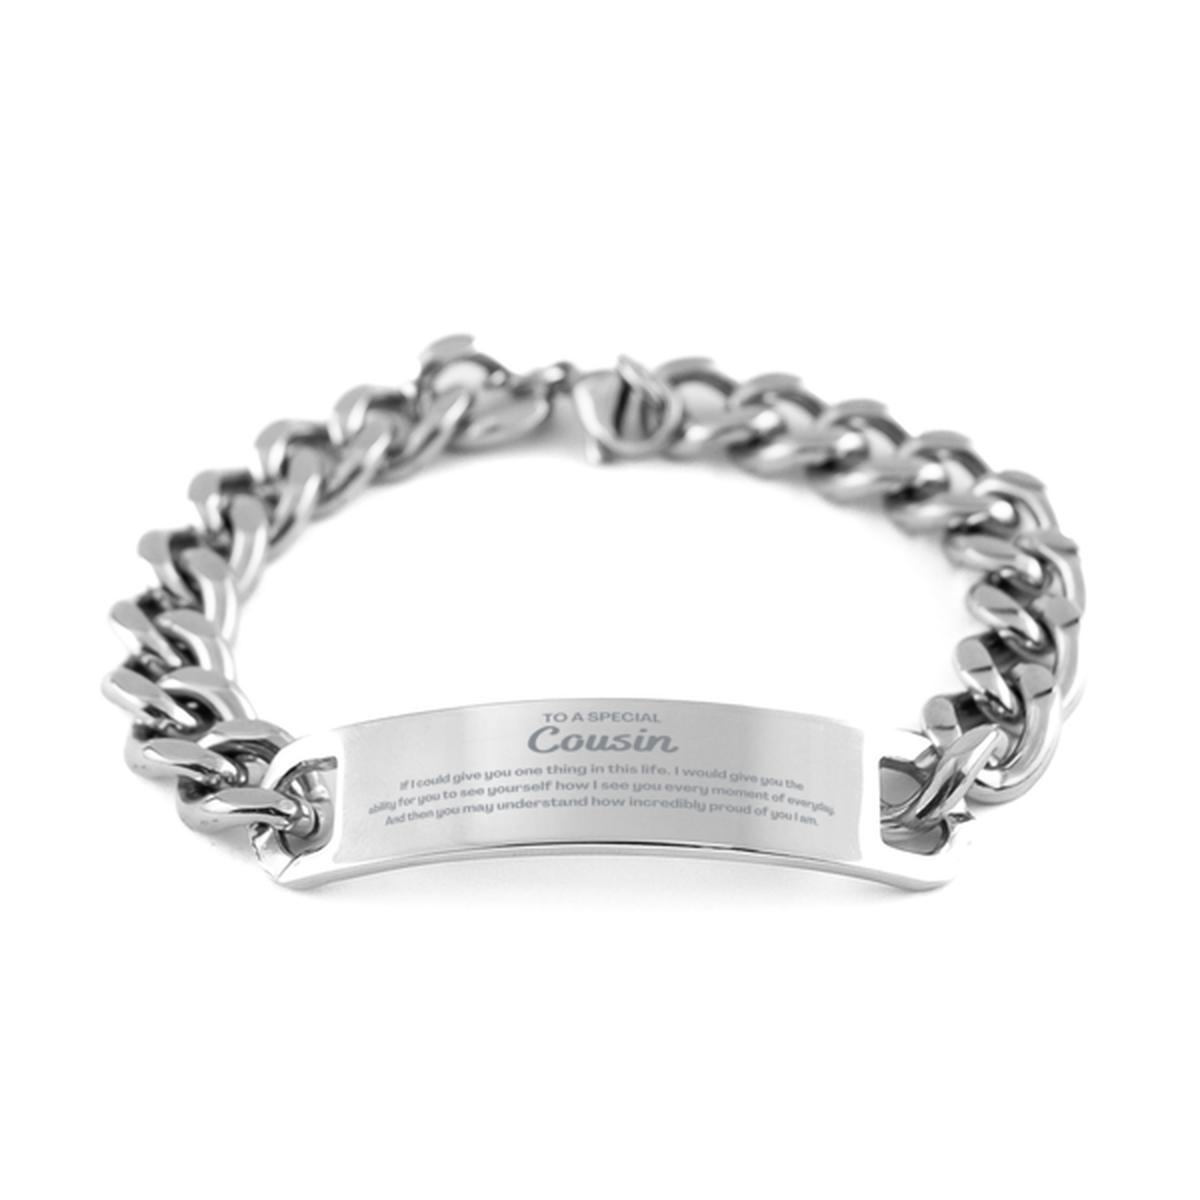 To My Cousin Cuban Chain Stainless Steel Bracelet, Gifts For Cousin Engraved, Inspirational Gifts for Christmas Birthday, Epic Gifts for Cousin To A Special Cousin how incredibly proud of you I am